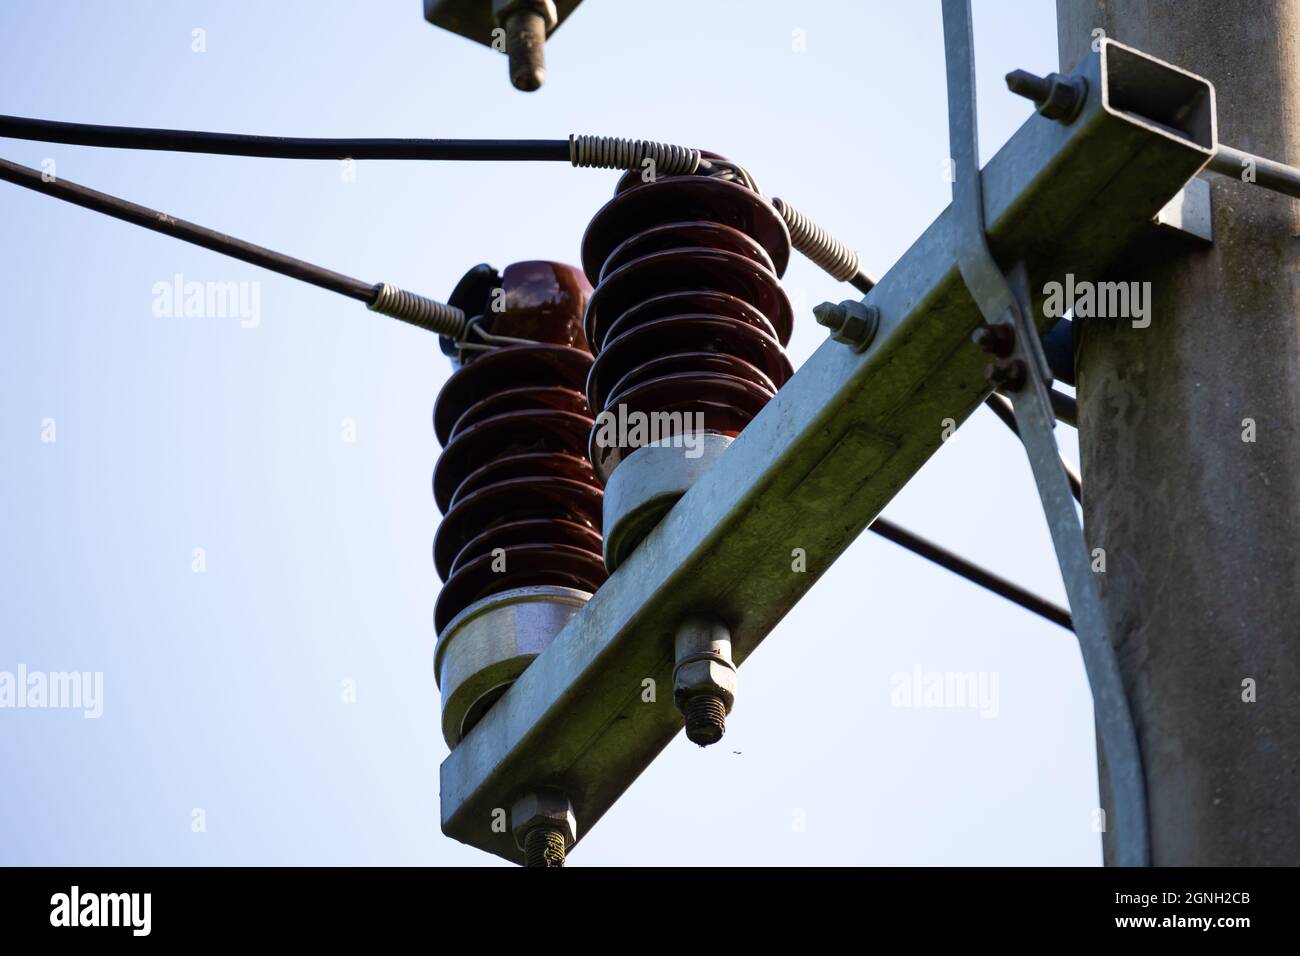 Ceramic insulators on low voltage pylons. Photo taken in good lighting conditions on a sunny day. Stock Photo